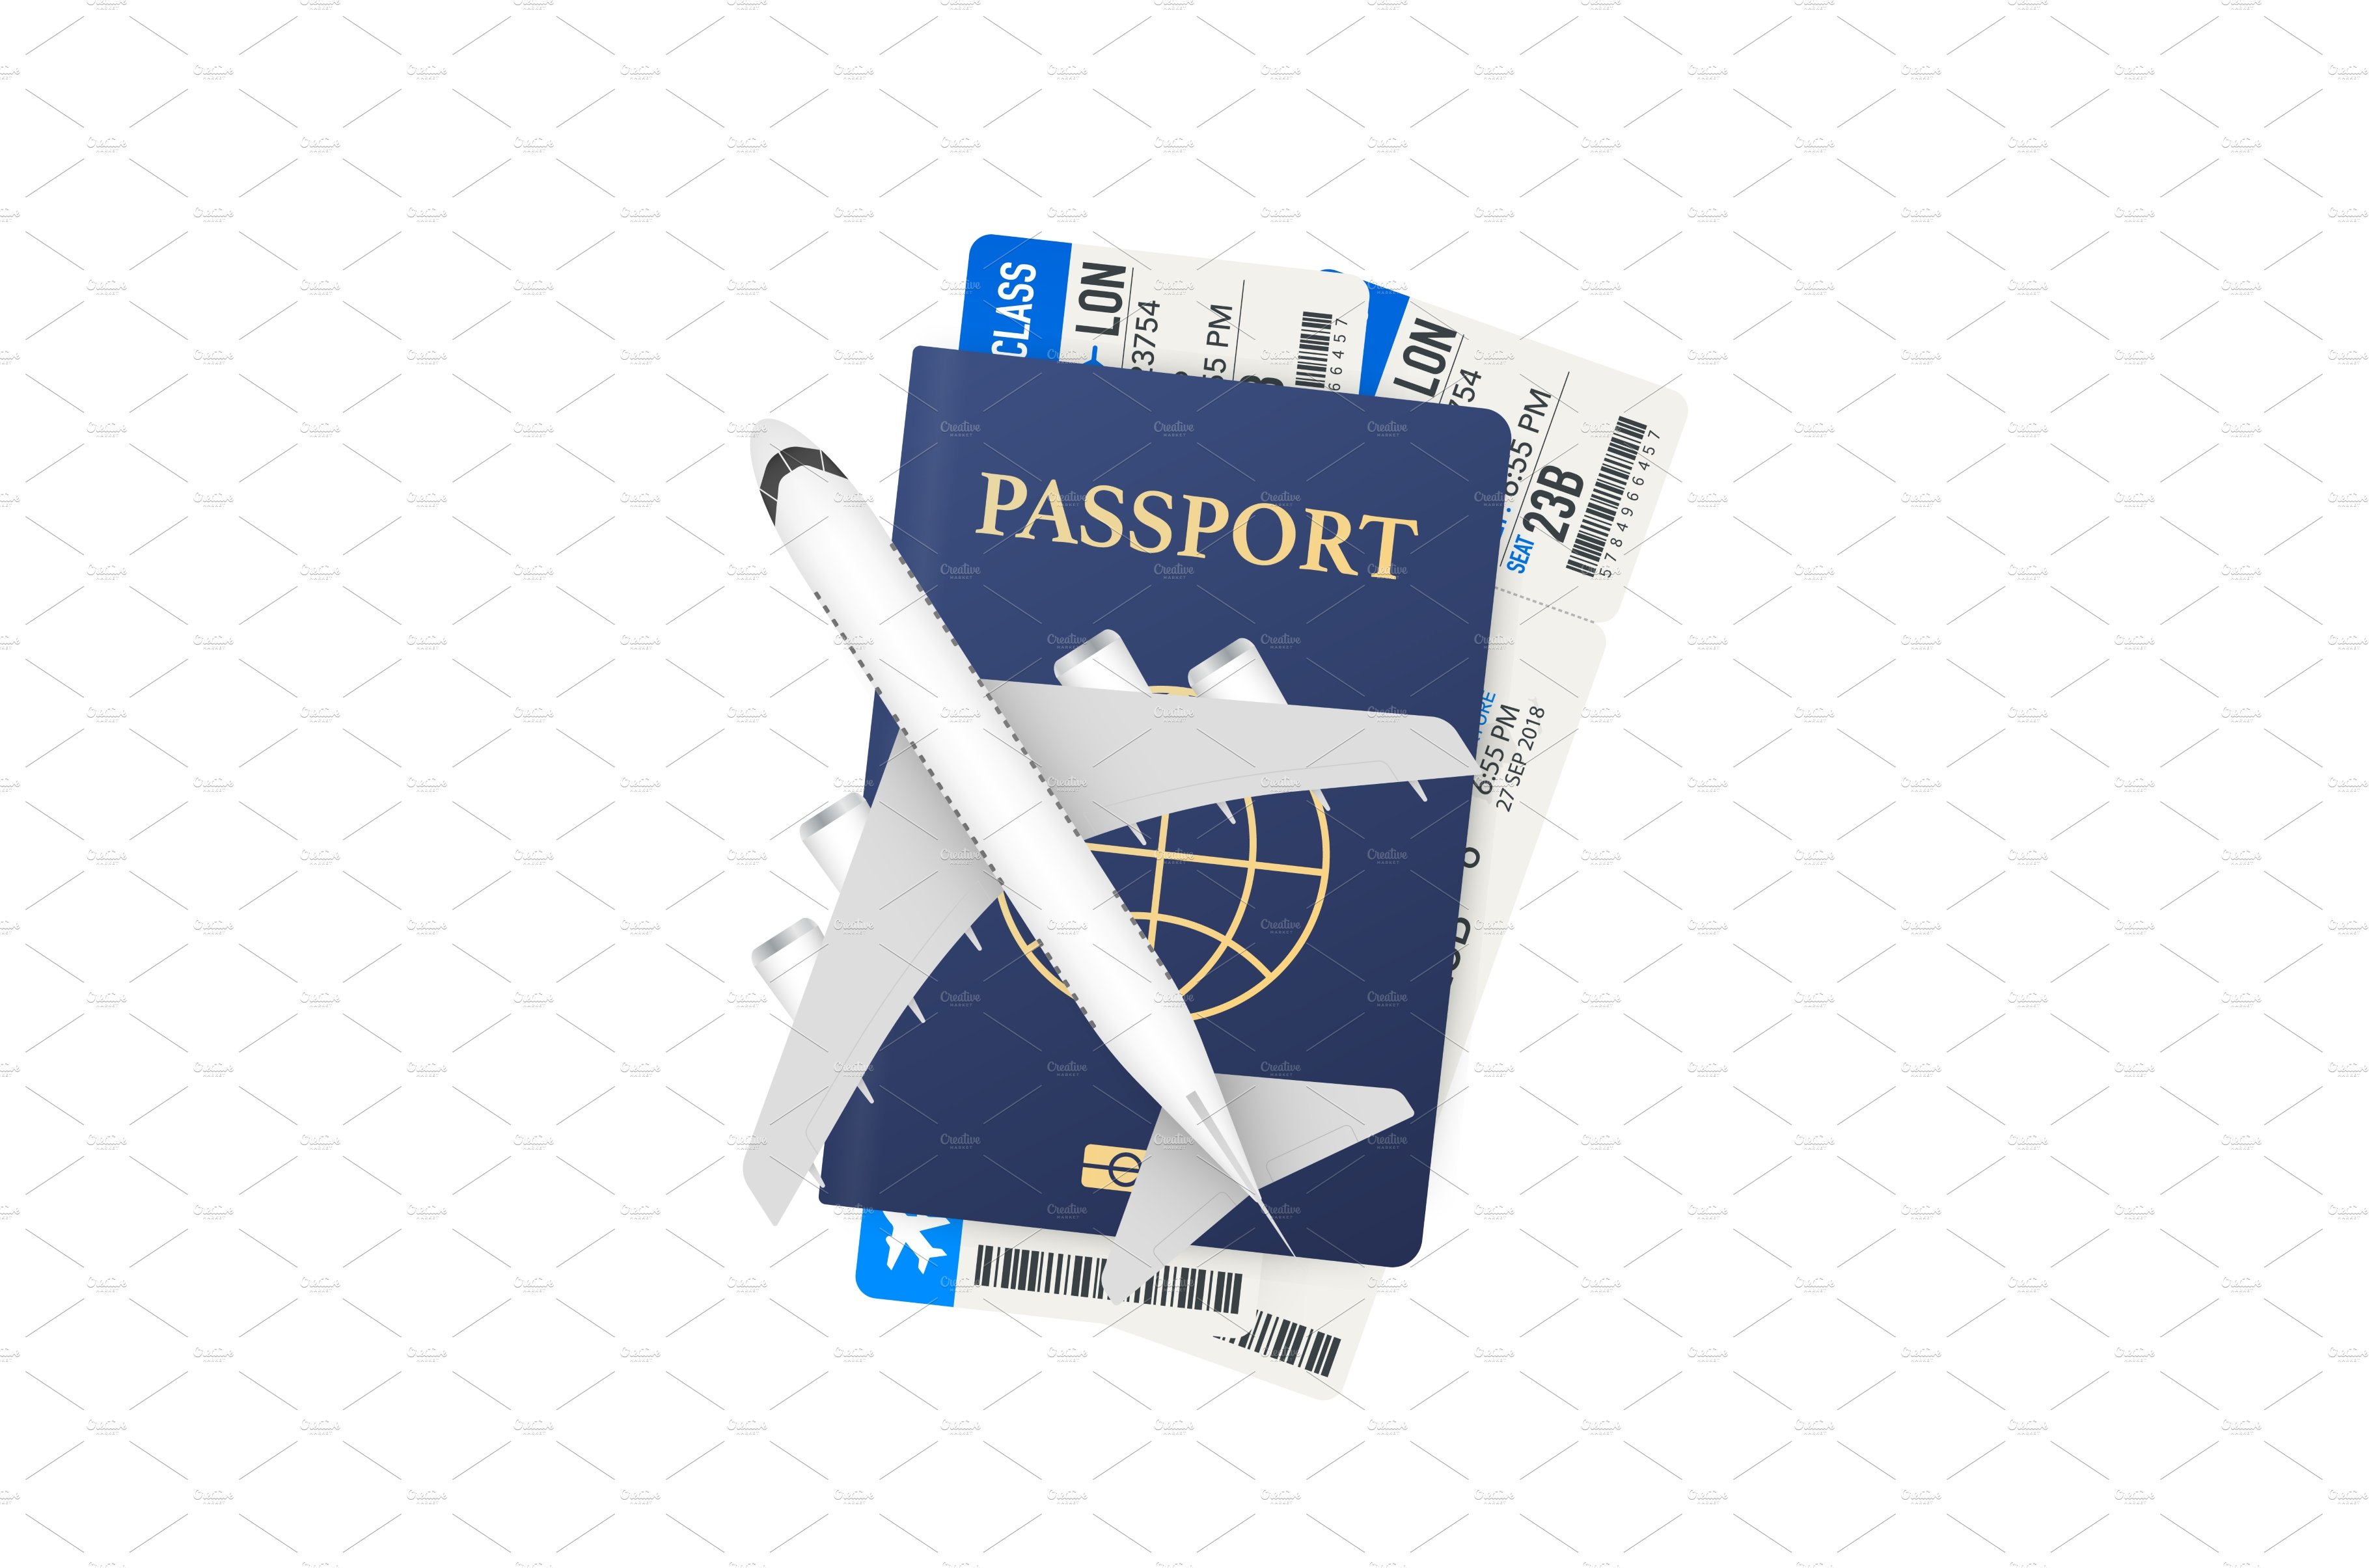 Passports, boarding passes and cover image.